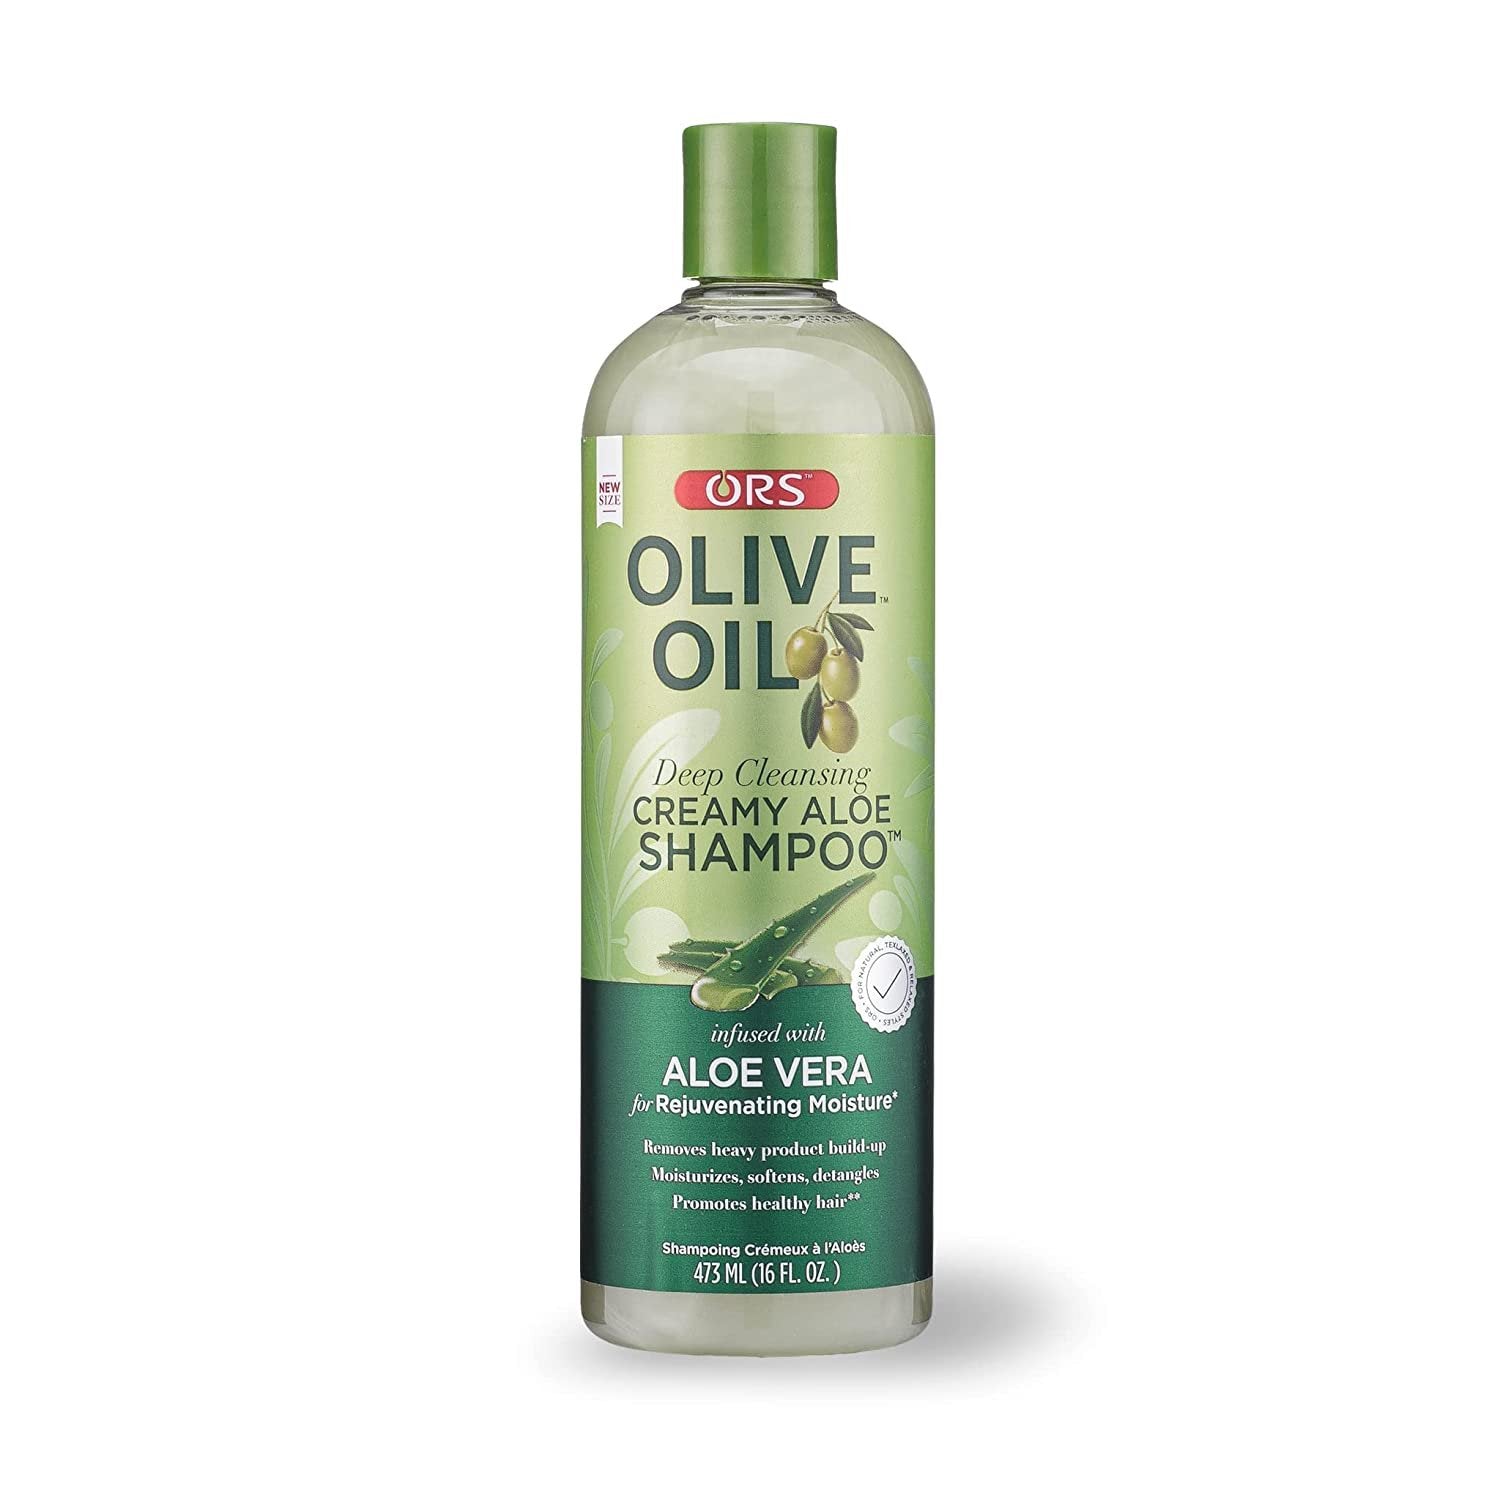 Ananiver Næsten Godkendelse ORS Olive Oil Deep Cleansing Creamy Aloe Shampoo Infused with Aloe Ver –  ORS Hair Care ®